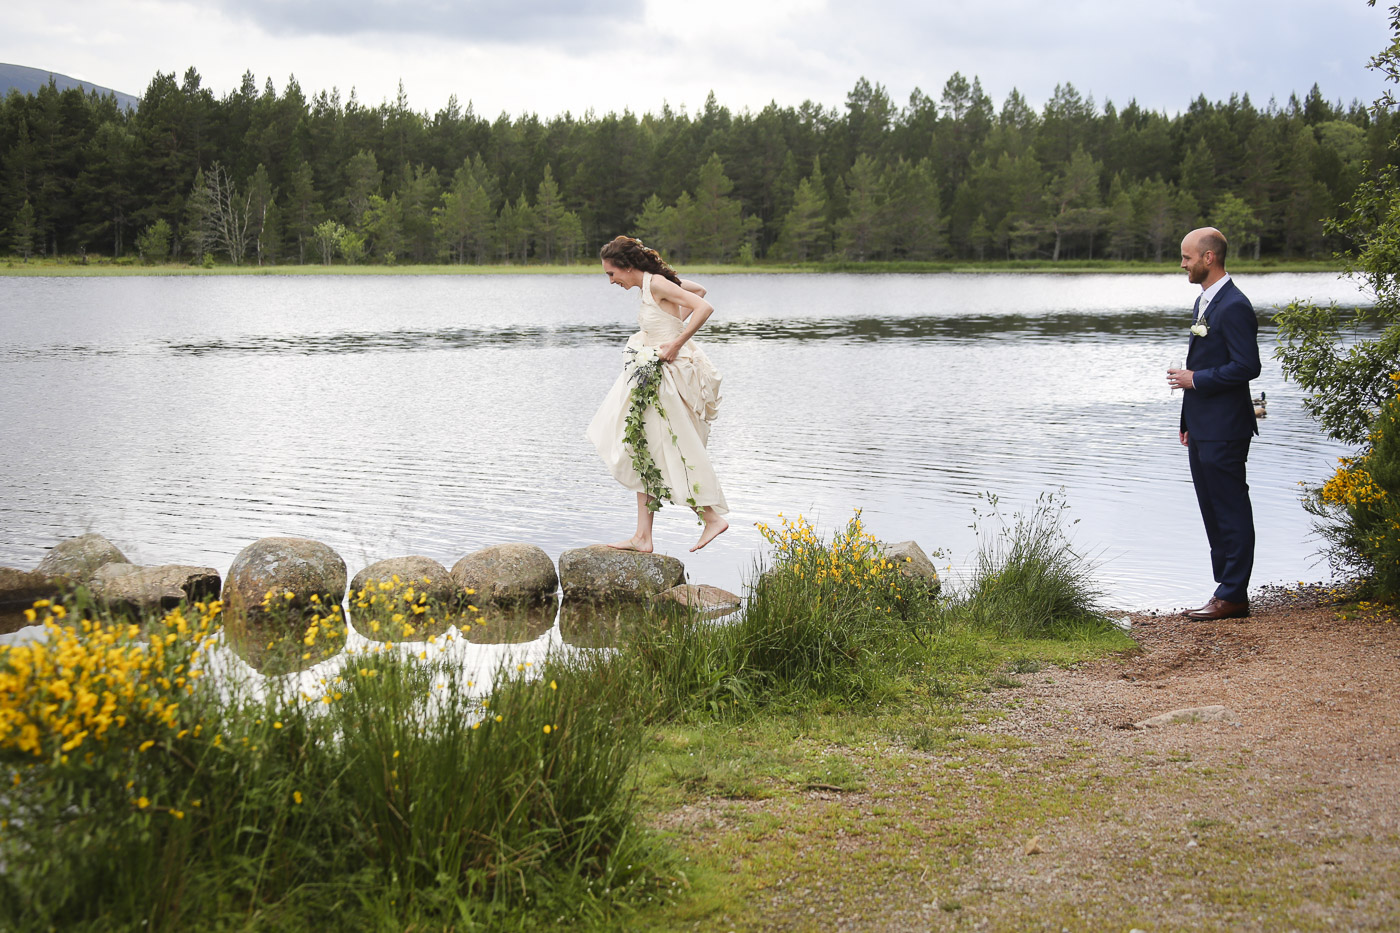 wedding photography at the Hilton Coylumbridge and Loch Morlich, Aviemore-1033 - Copy